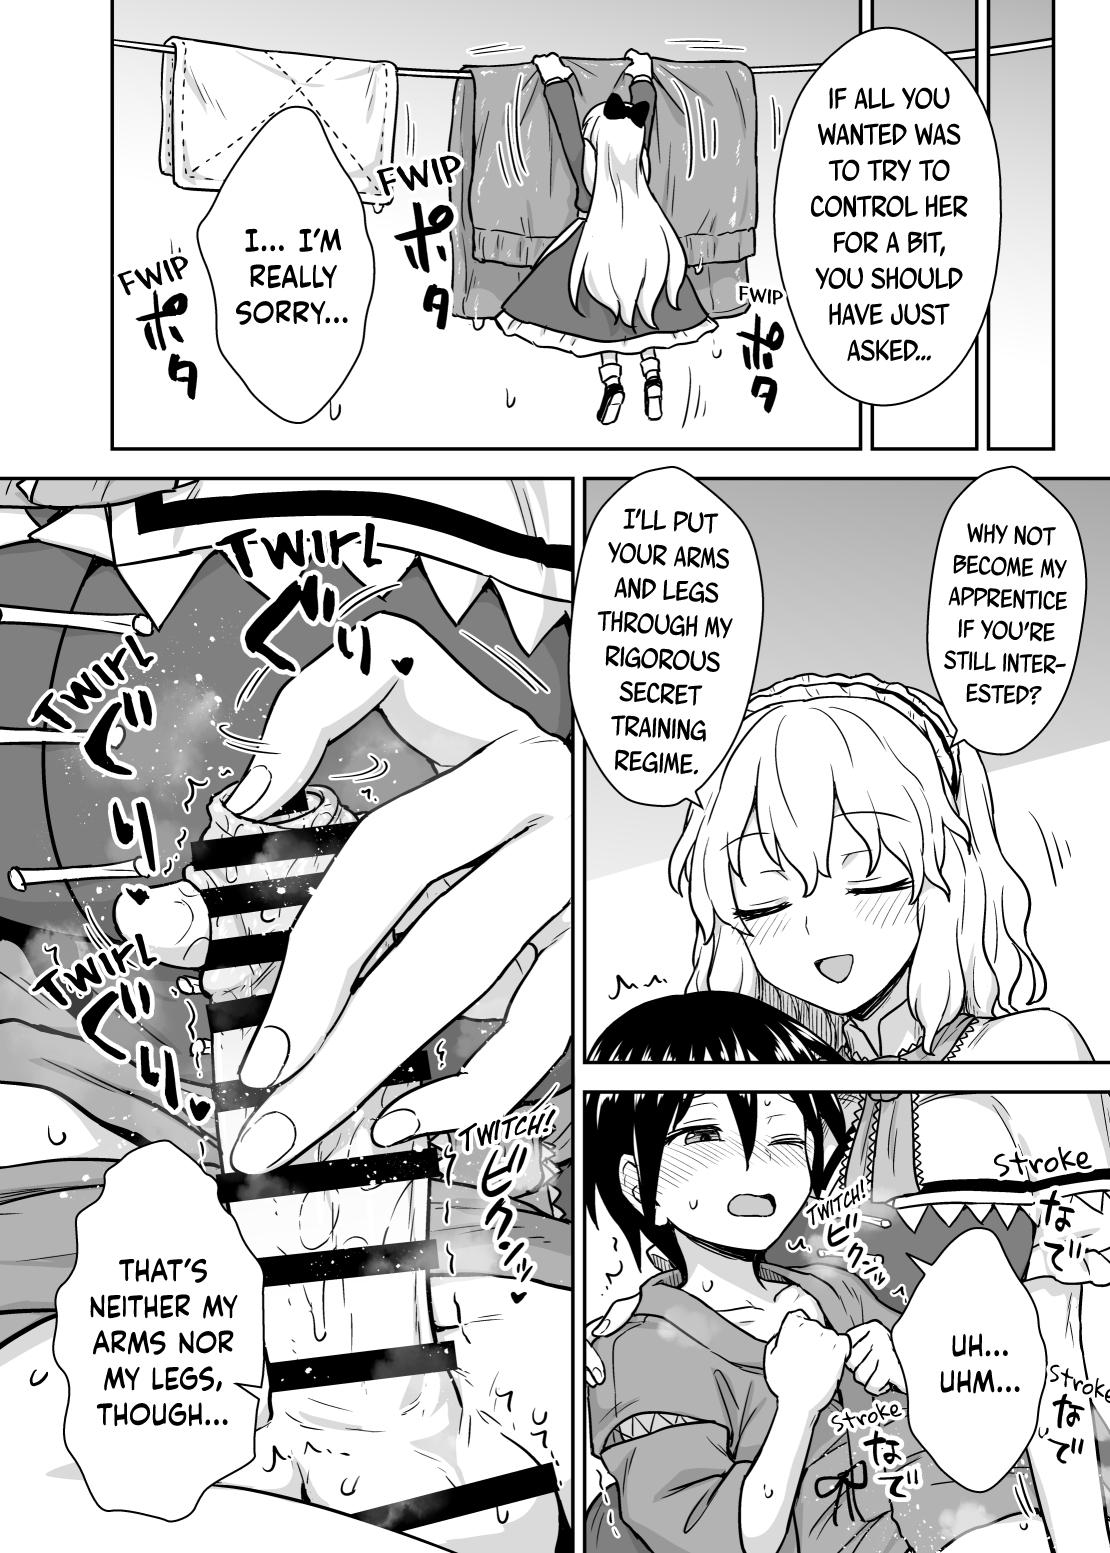 Cbt Alice-san to Himitsuzukuri | Making Secrets with Miss Alice - Touhou project Gay Hardcore - Page 5